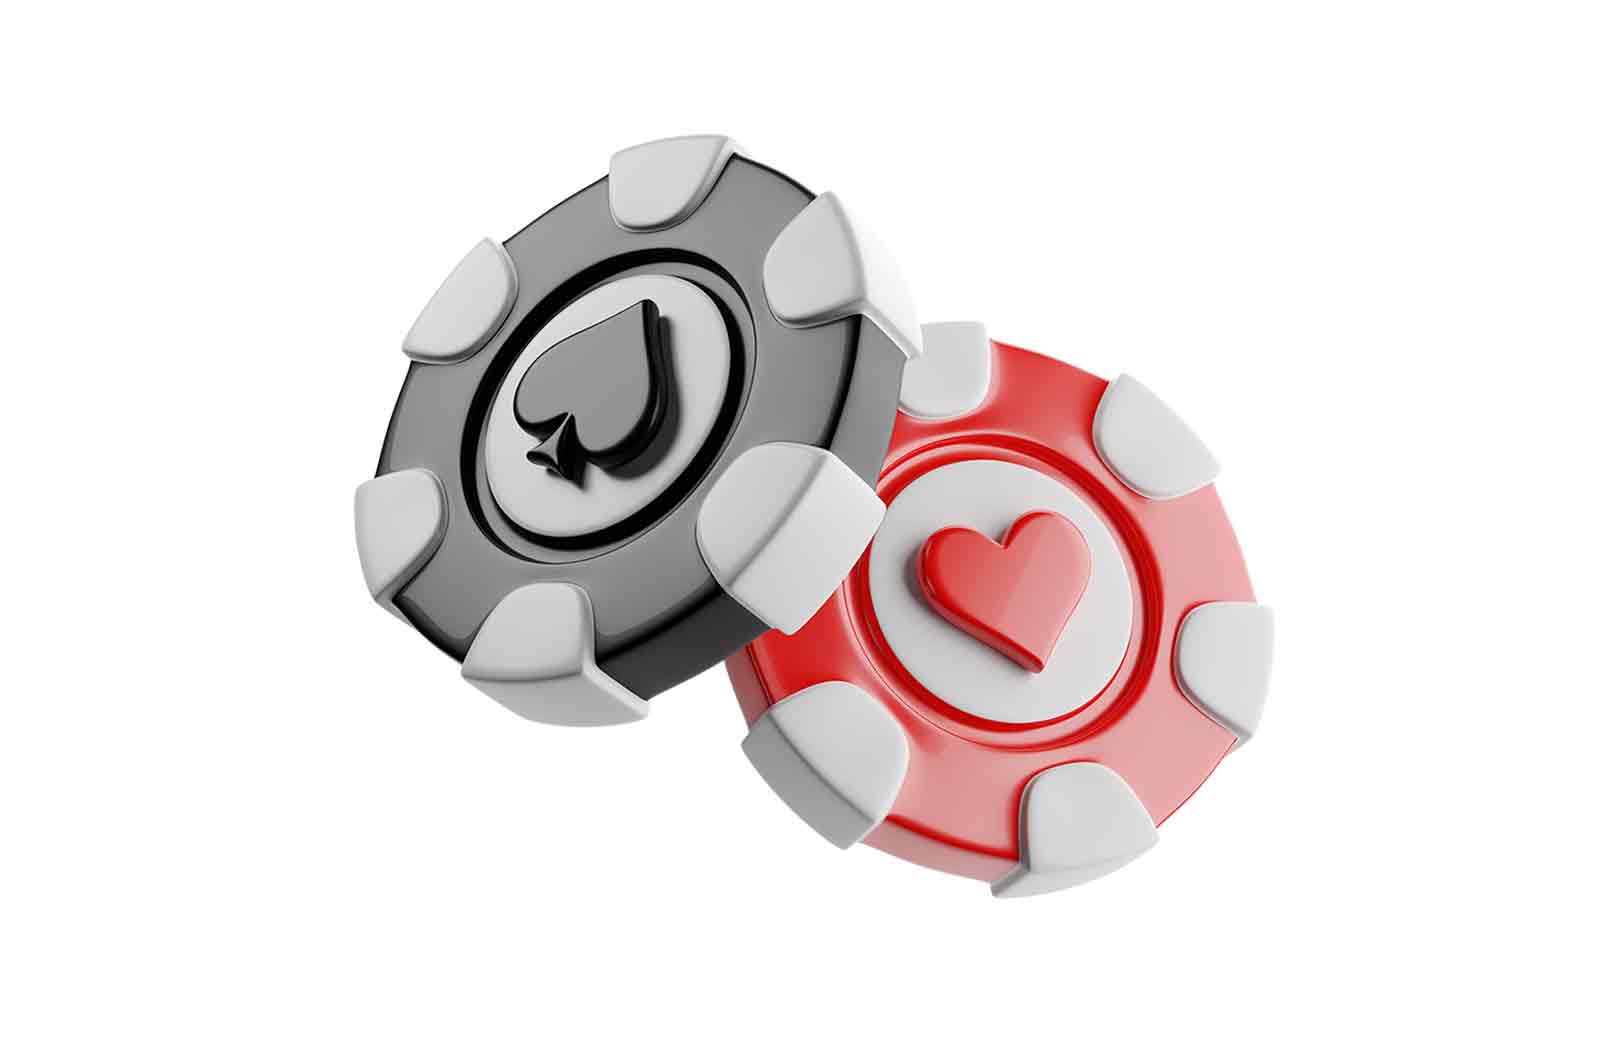 Poker Chips, 3D Rendered Illustration of two overlapping chips, one red with a white heart and one gray with a black spade. The image depicts motion, gambling, and card games.